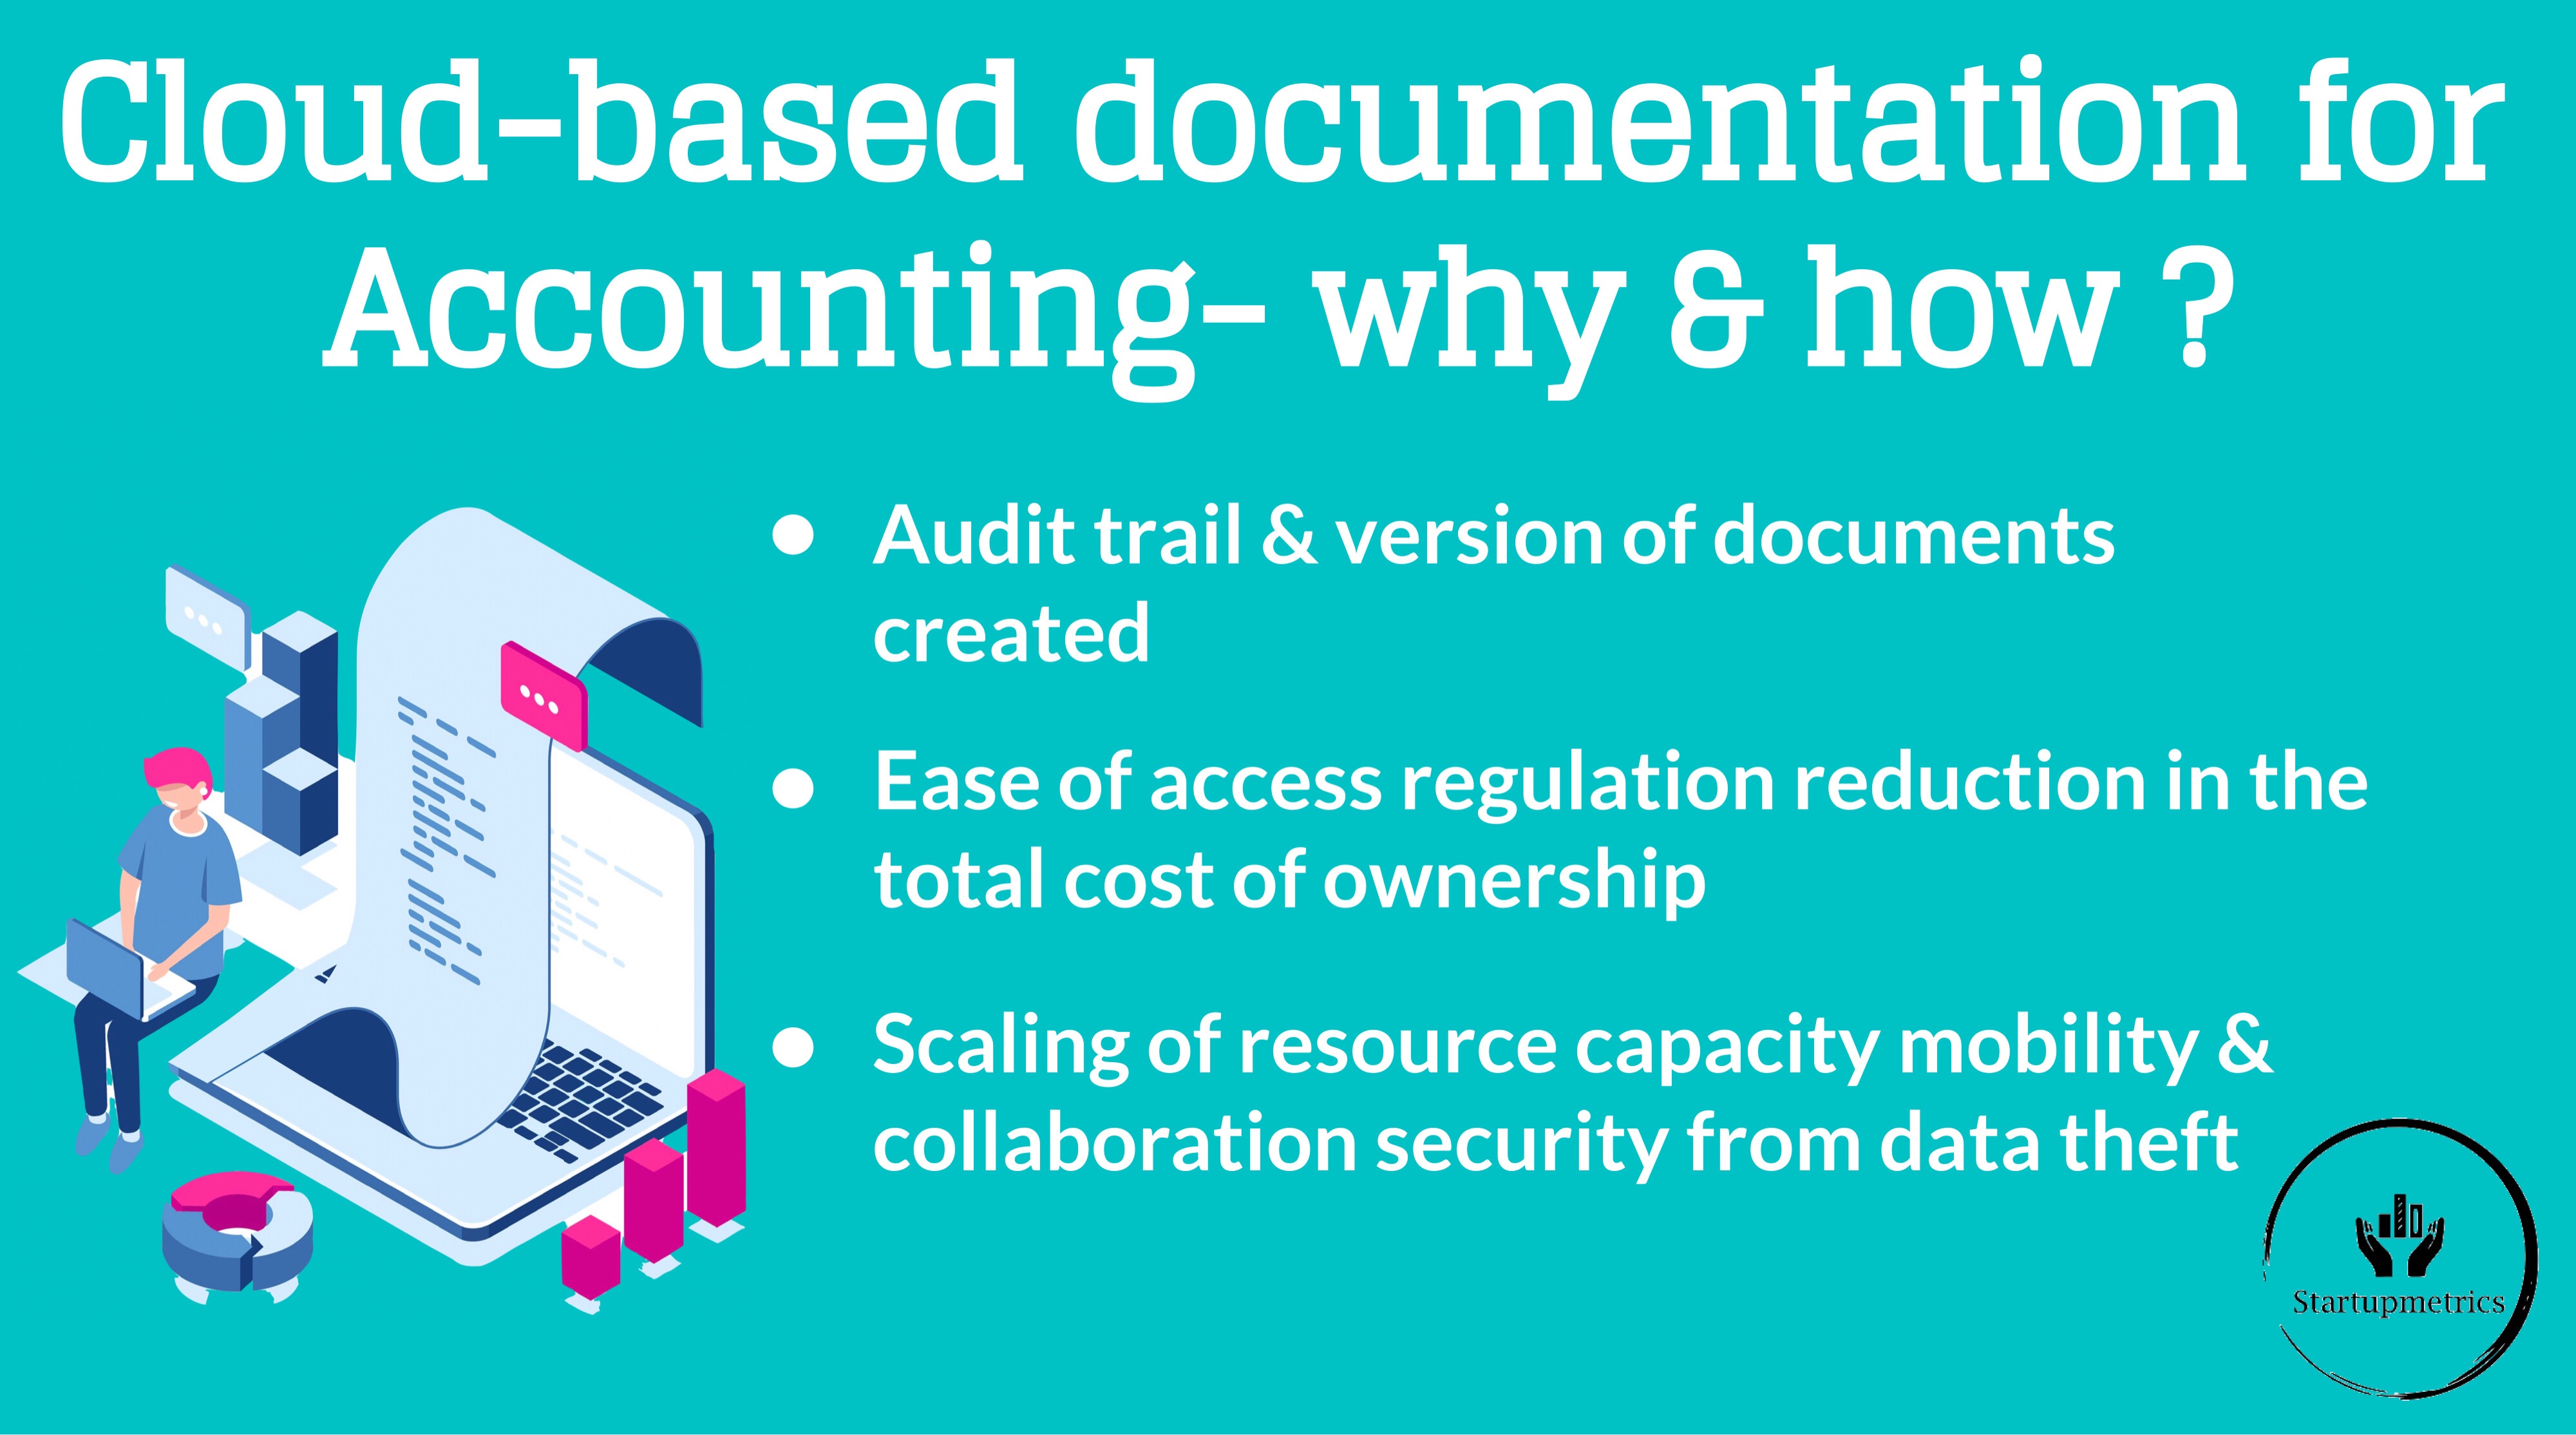 Cloud-based documentation for accounting- why & how?